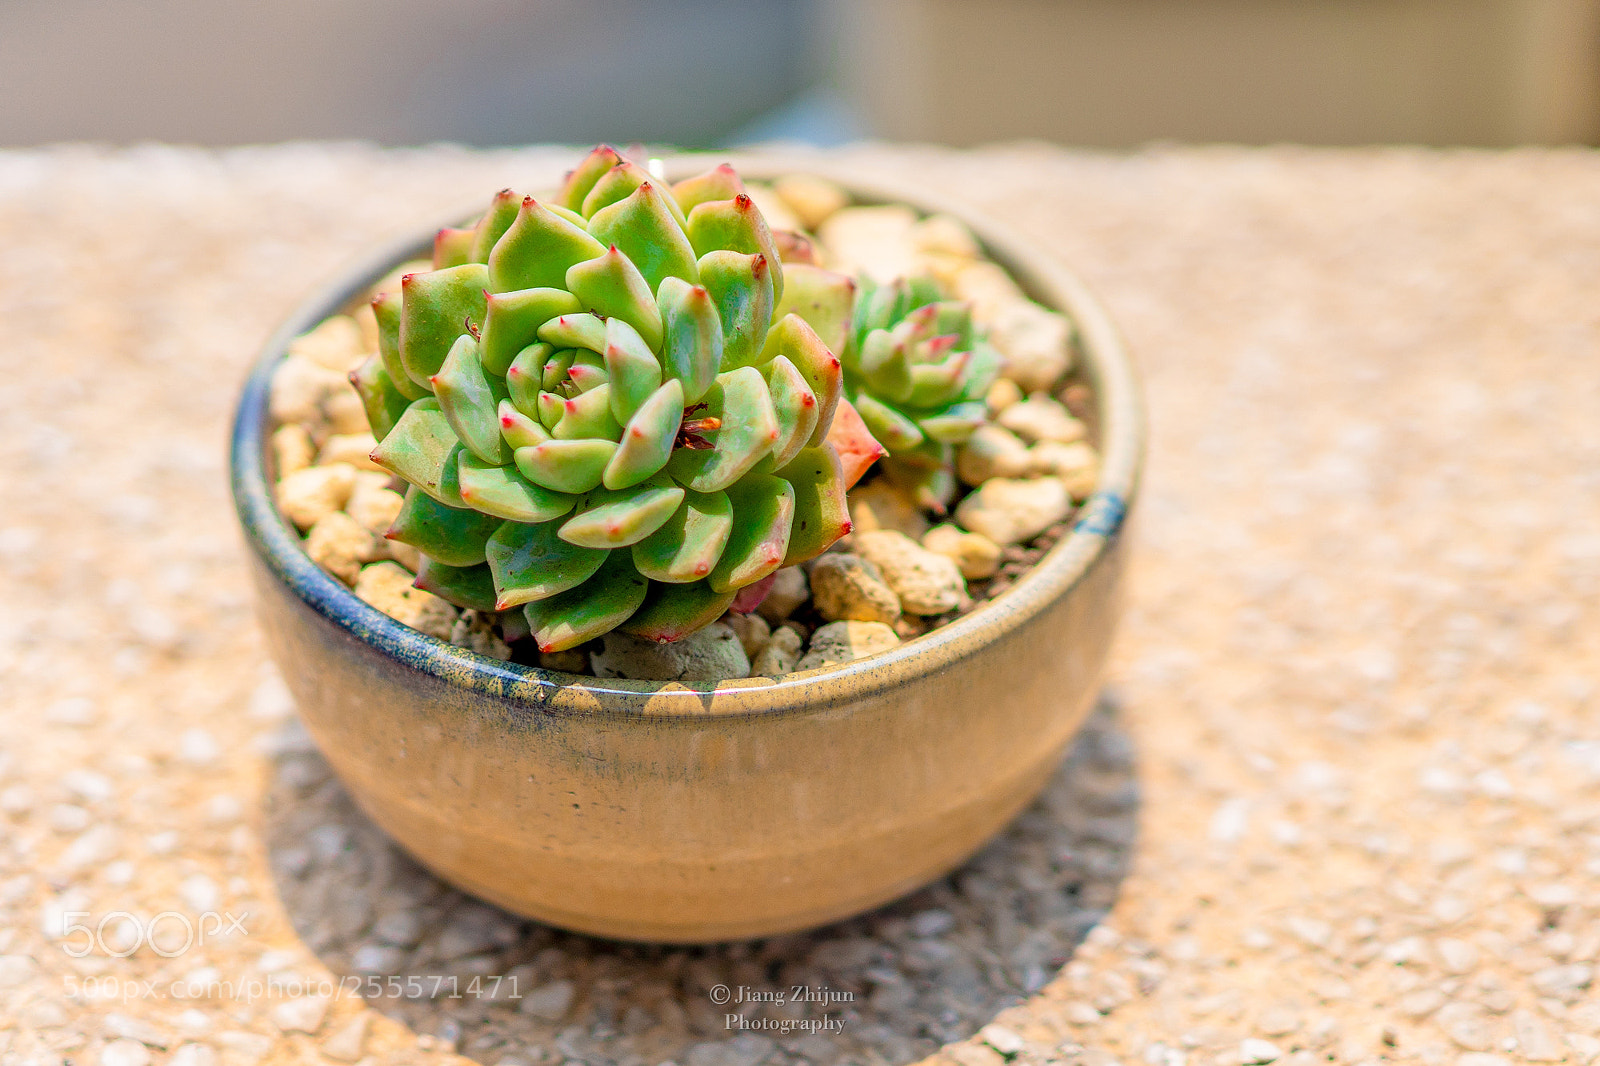 Sony a7 III sample photo. Succulent plant photography